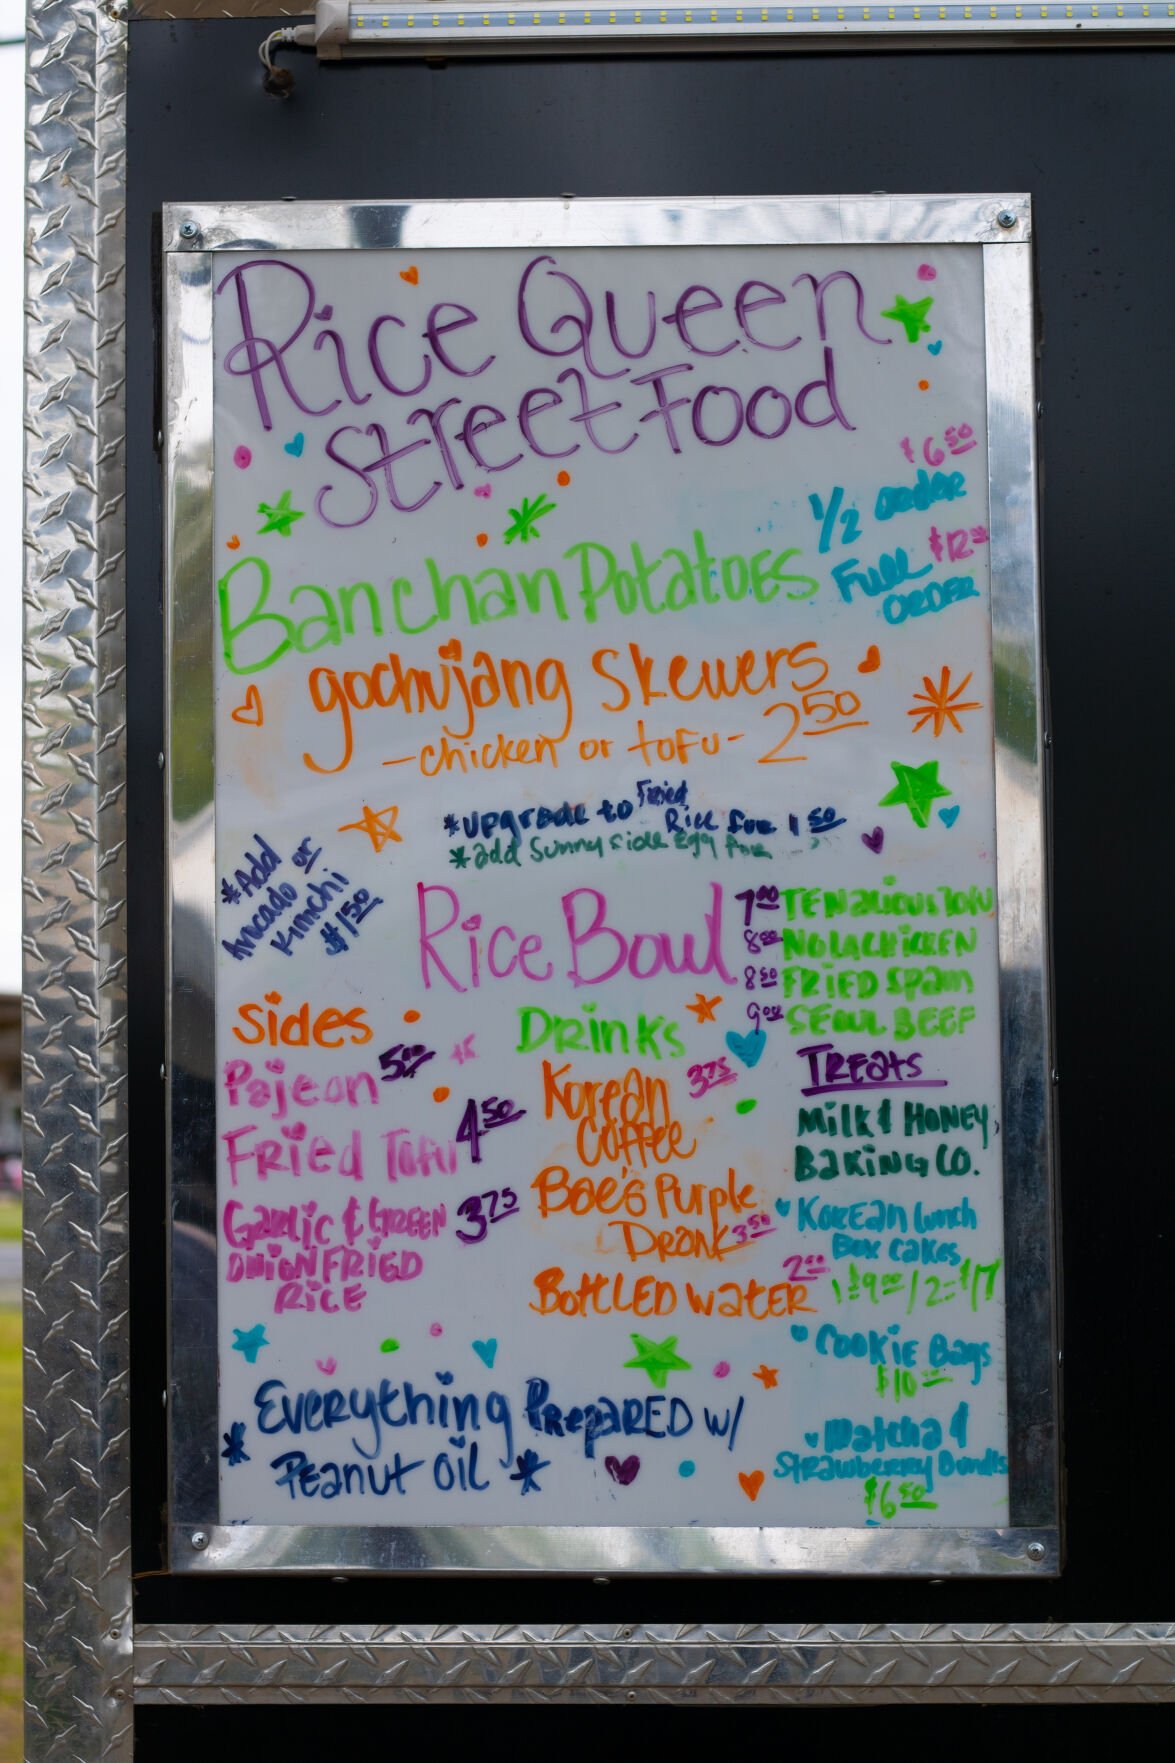 REVIEW: Rice Queen Food Truck brings new street food ...